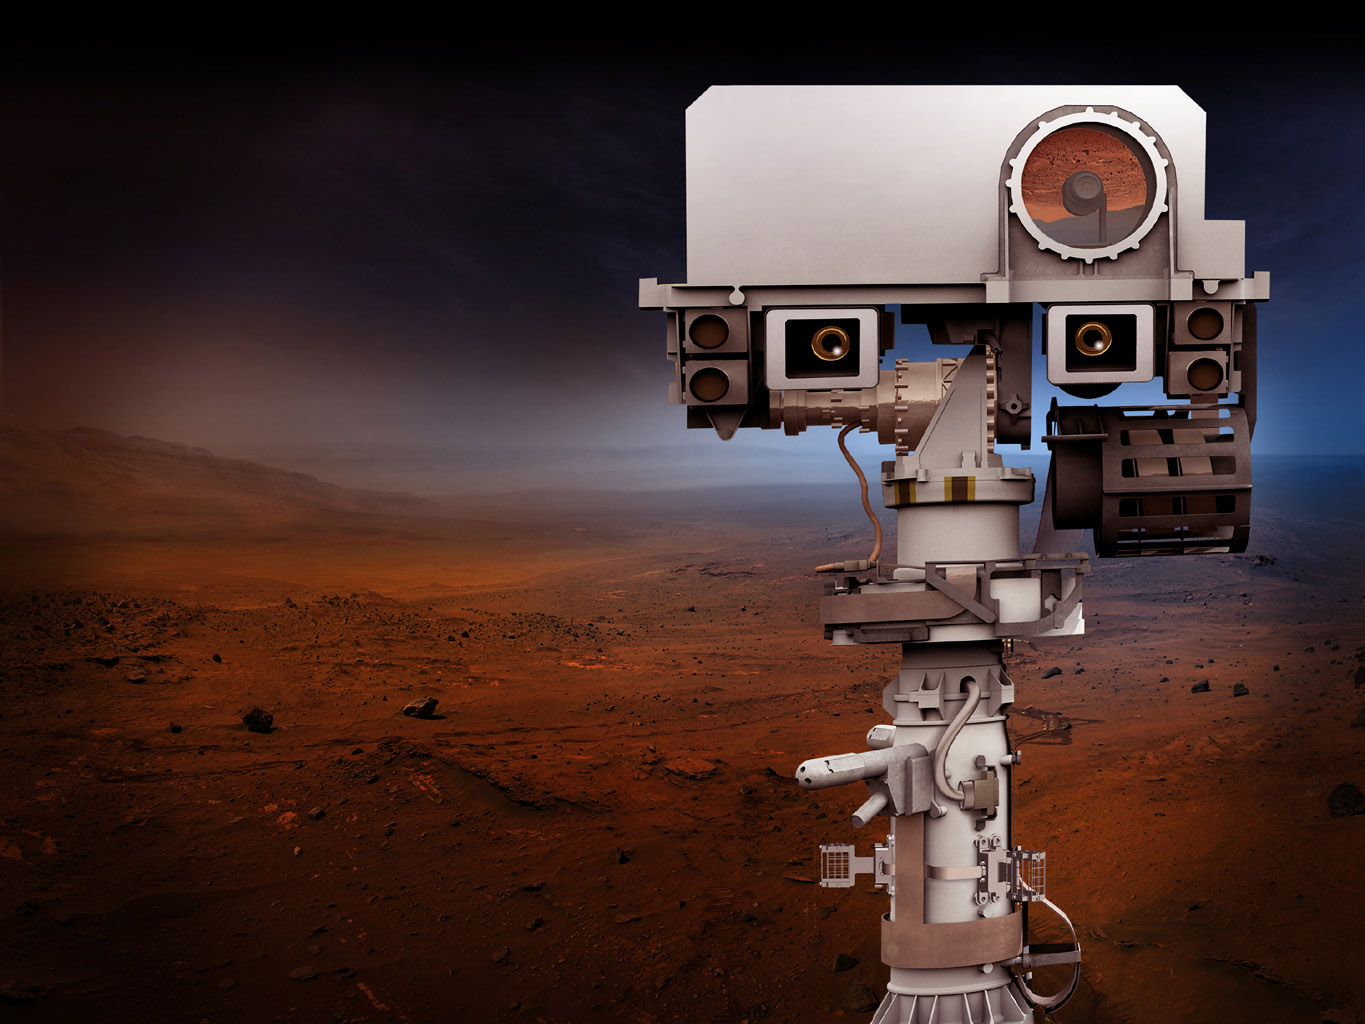 NASA’s future Mars robot will take the fastest pictures yet of the red planet